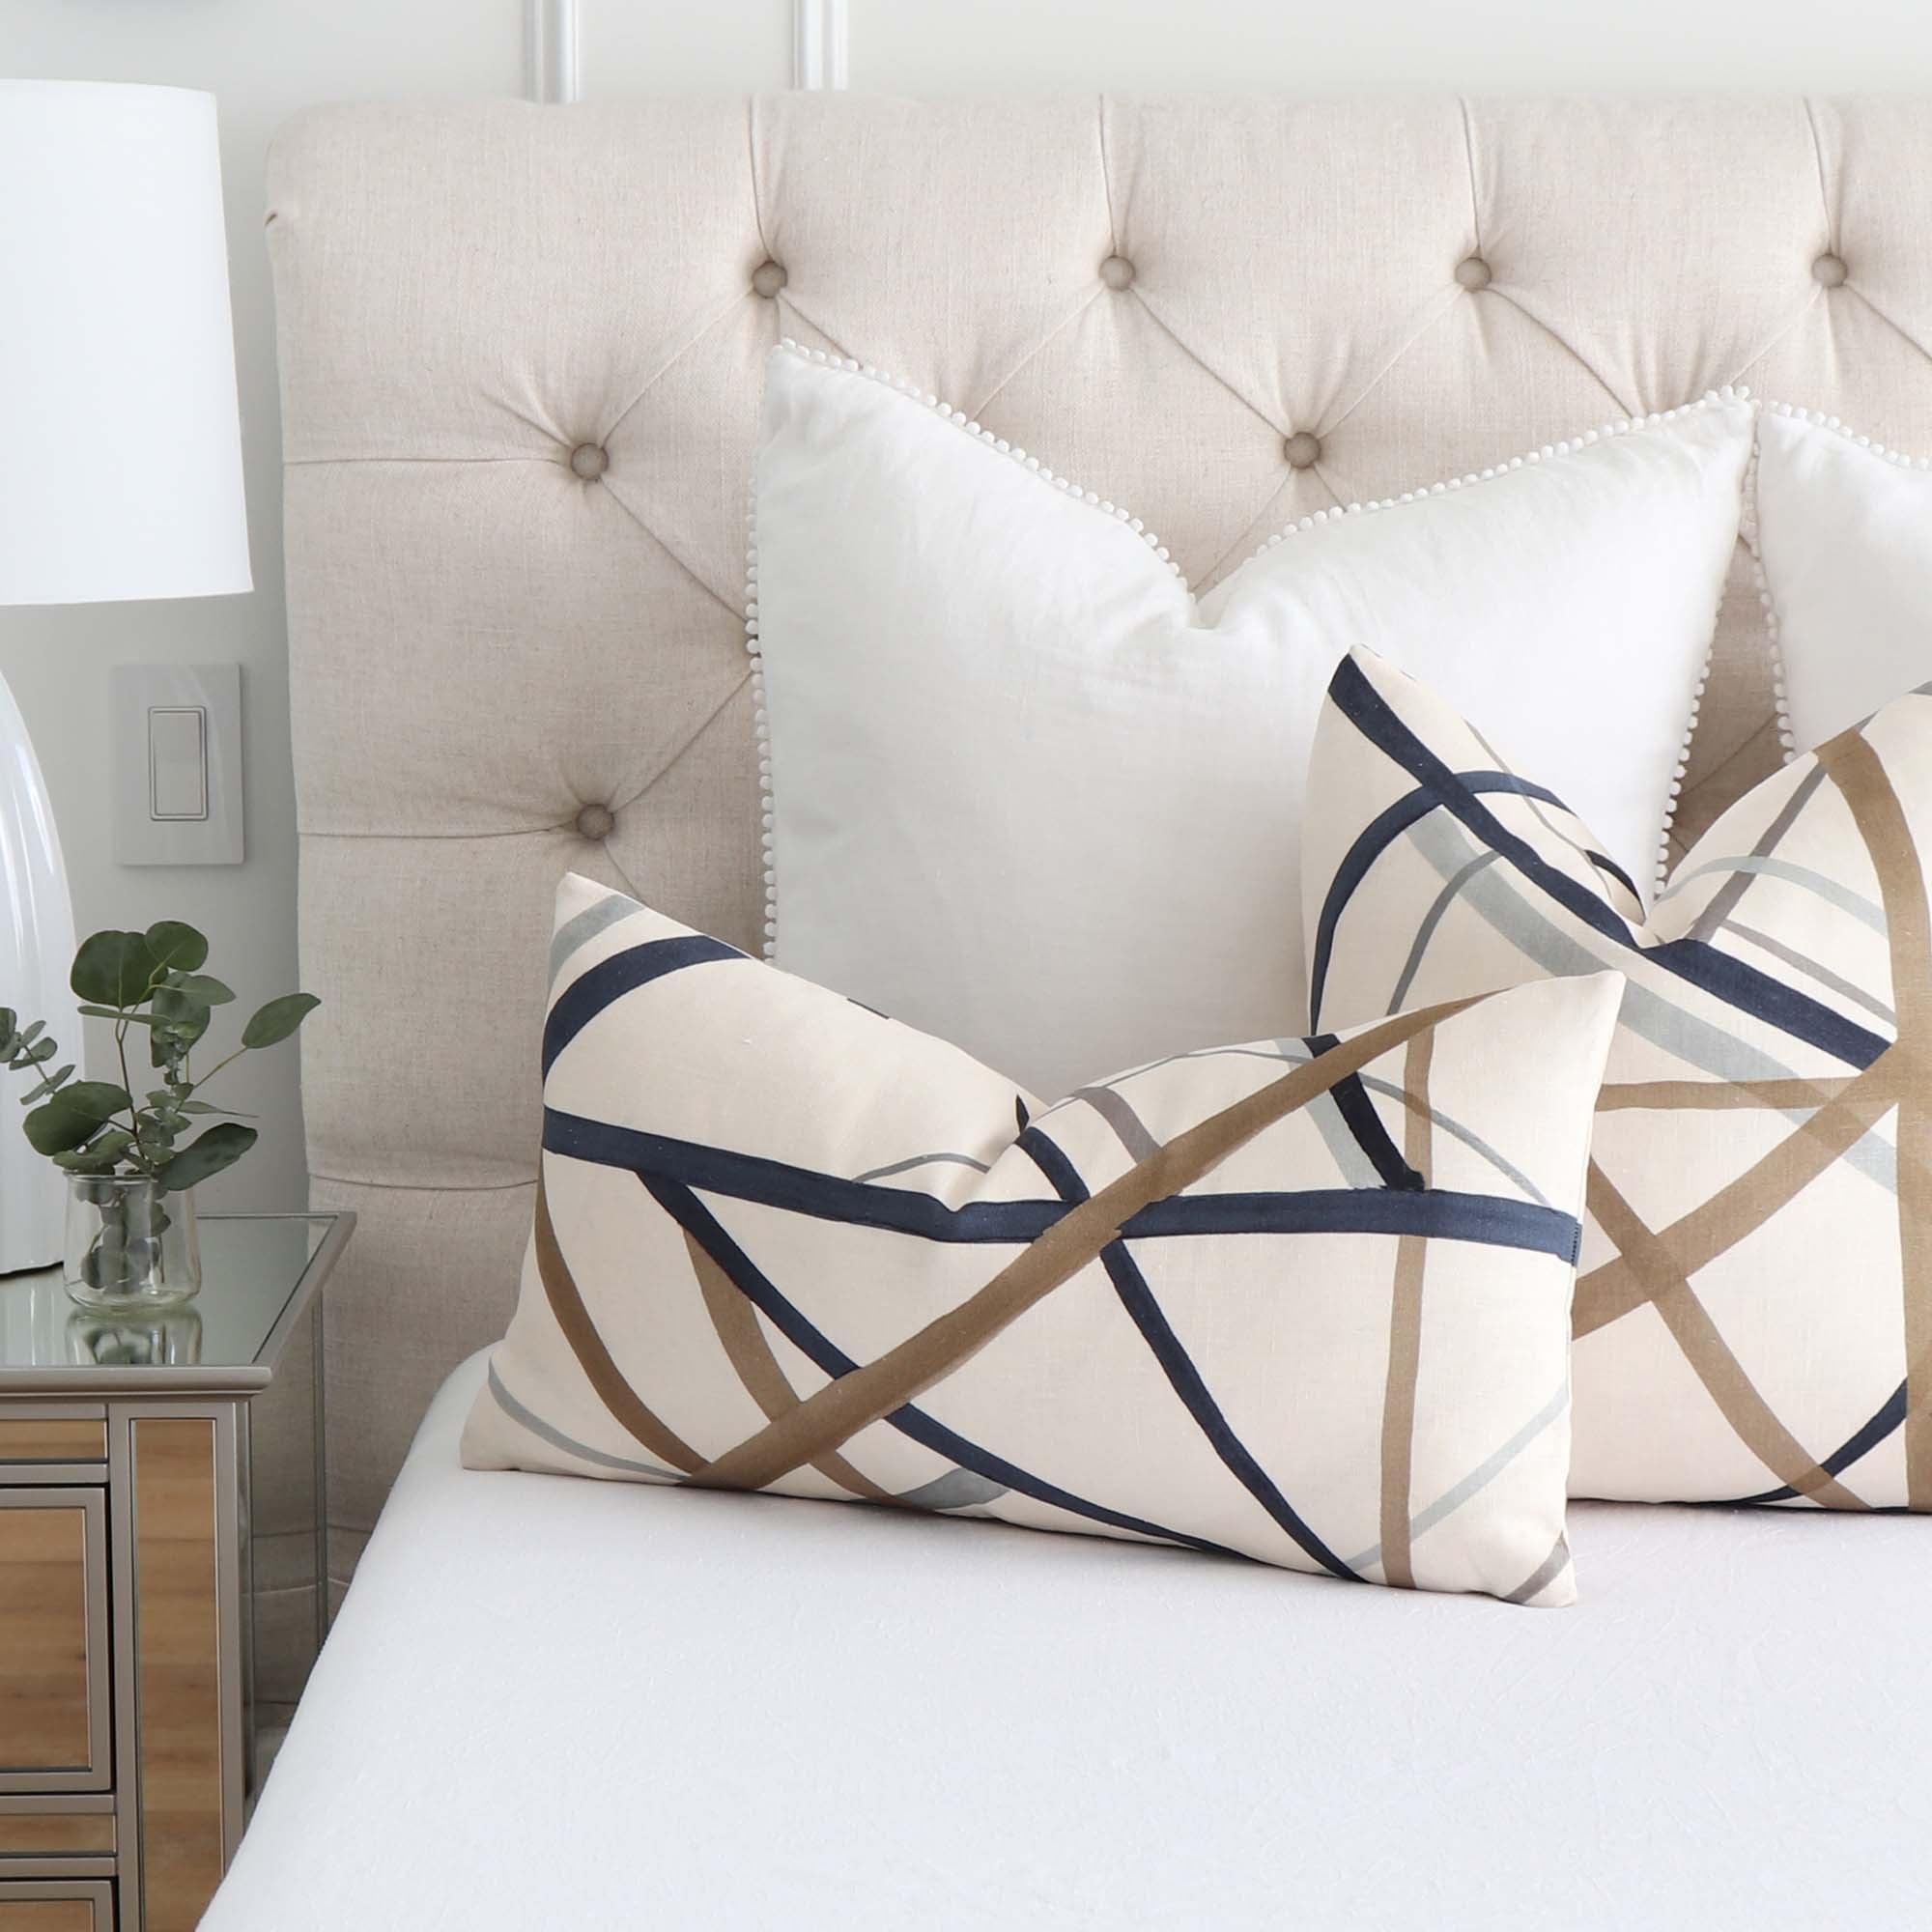 Striped Simpatico Terracotta Throw Pillow Cover by Chloe & Olive